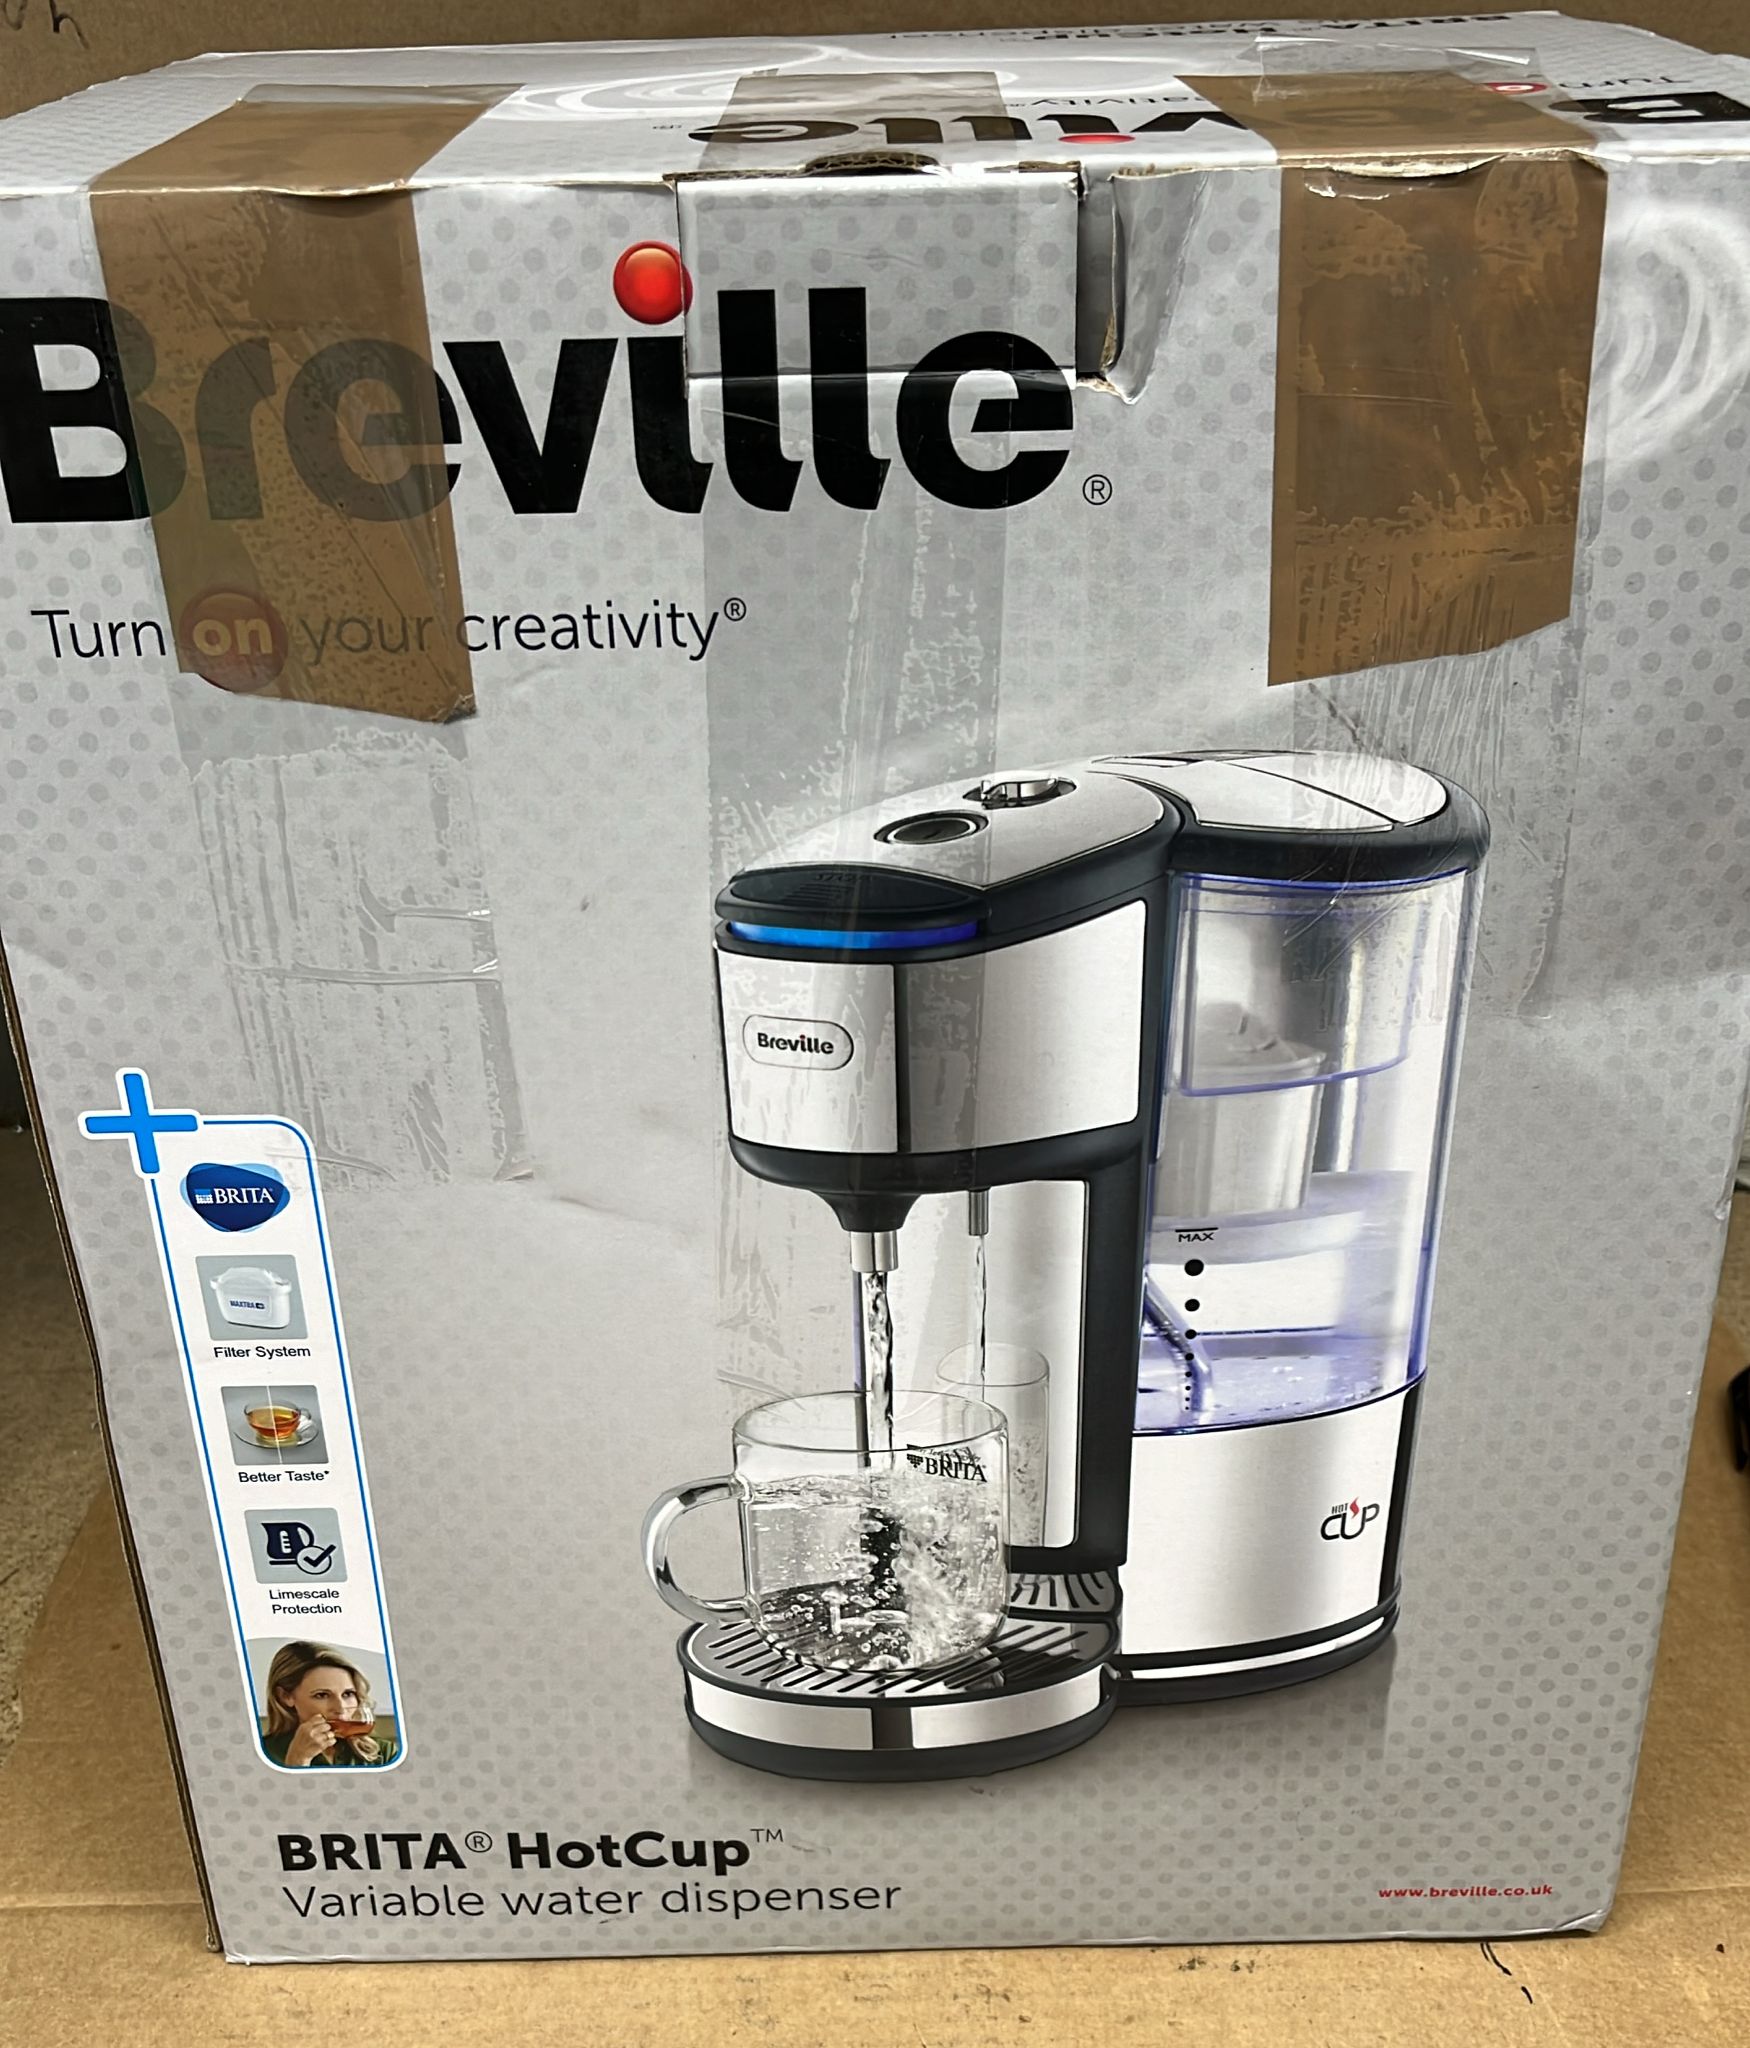 Breville BRITA HotCup Hot Water Dispenser | With integrated water filter | 3kW Fast Boil &Variable Dispense- A2636U